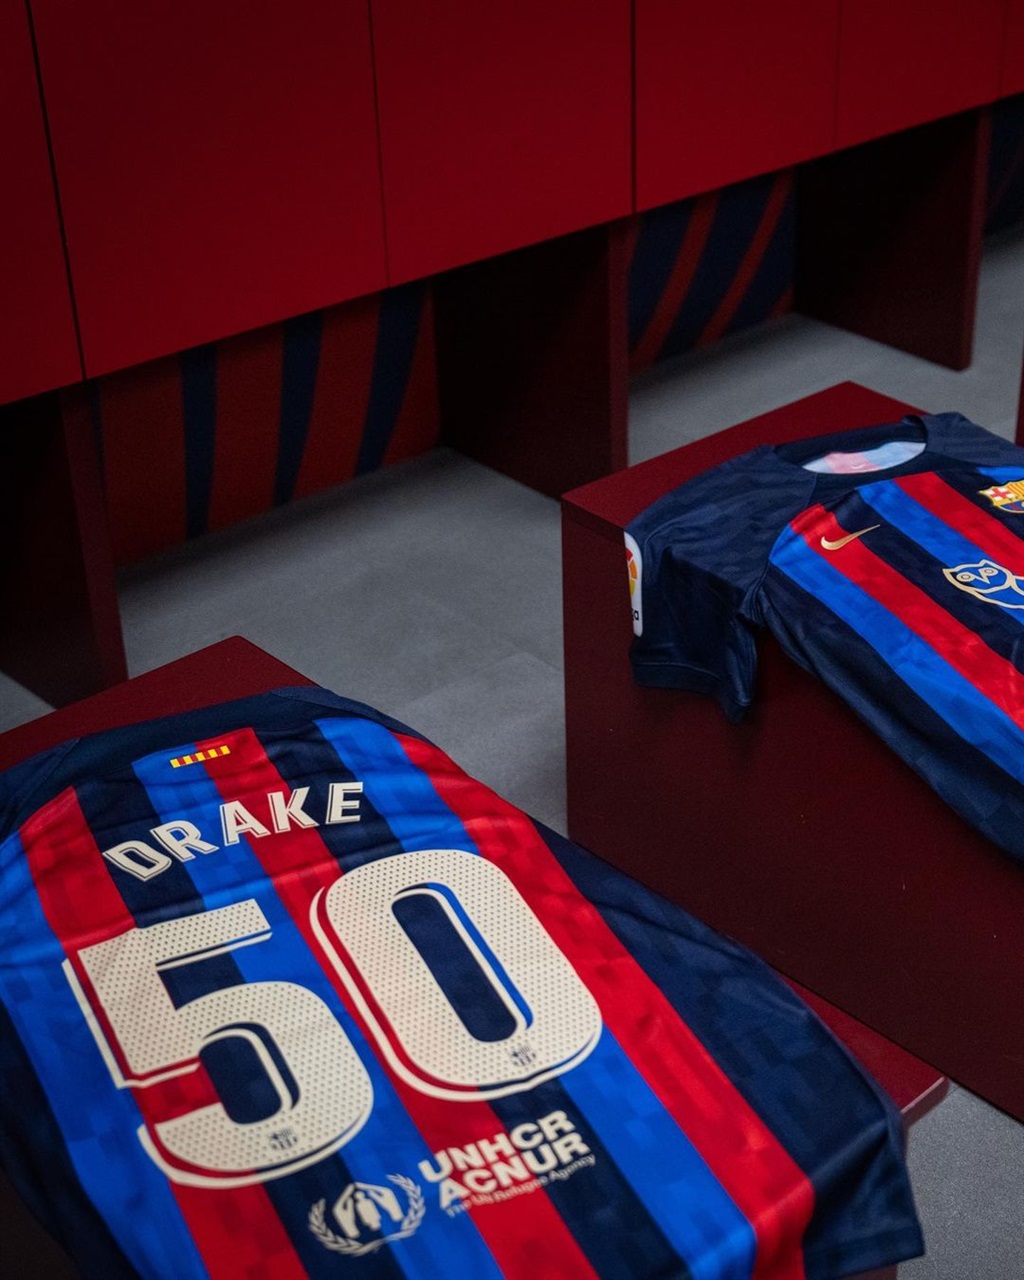 Barcelona's home jersey with Drake's name and numb